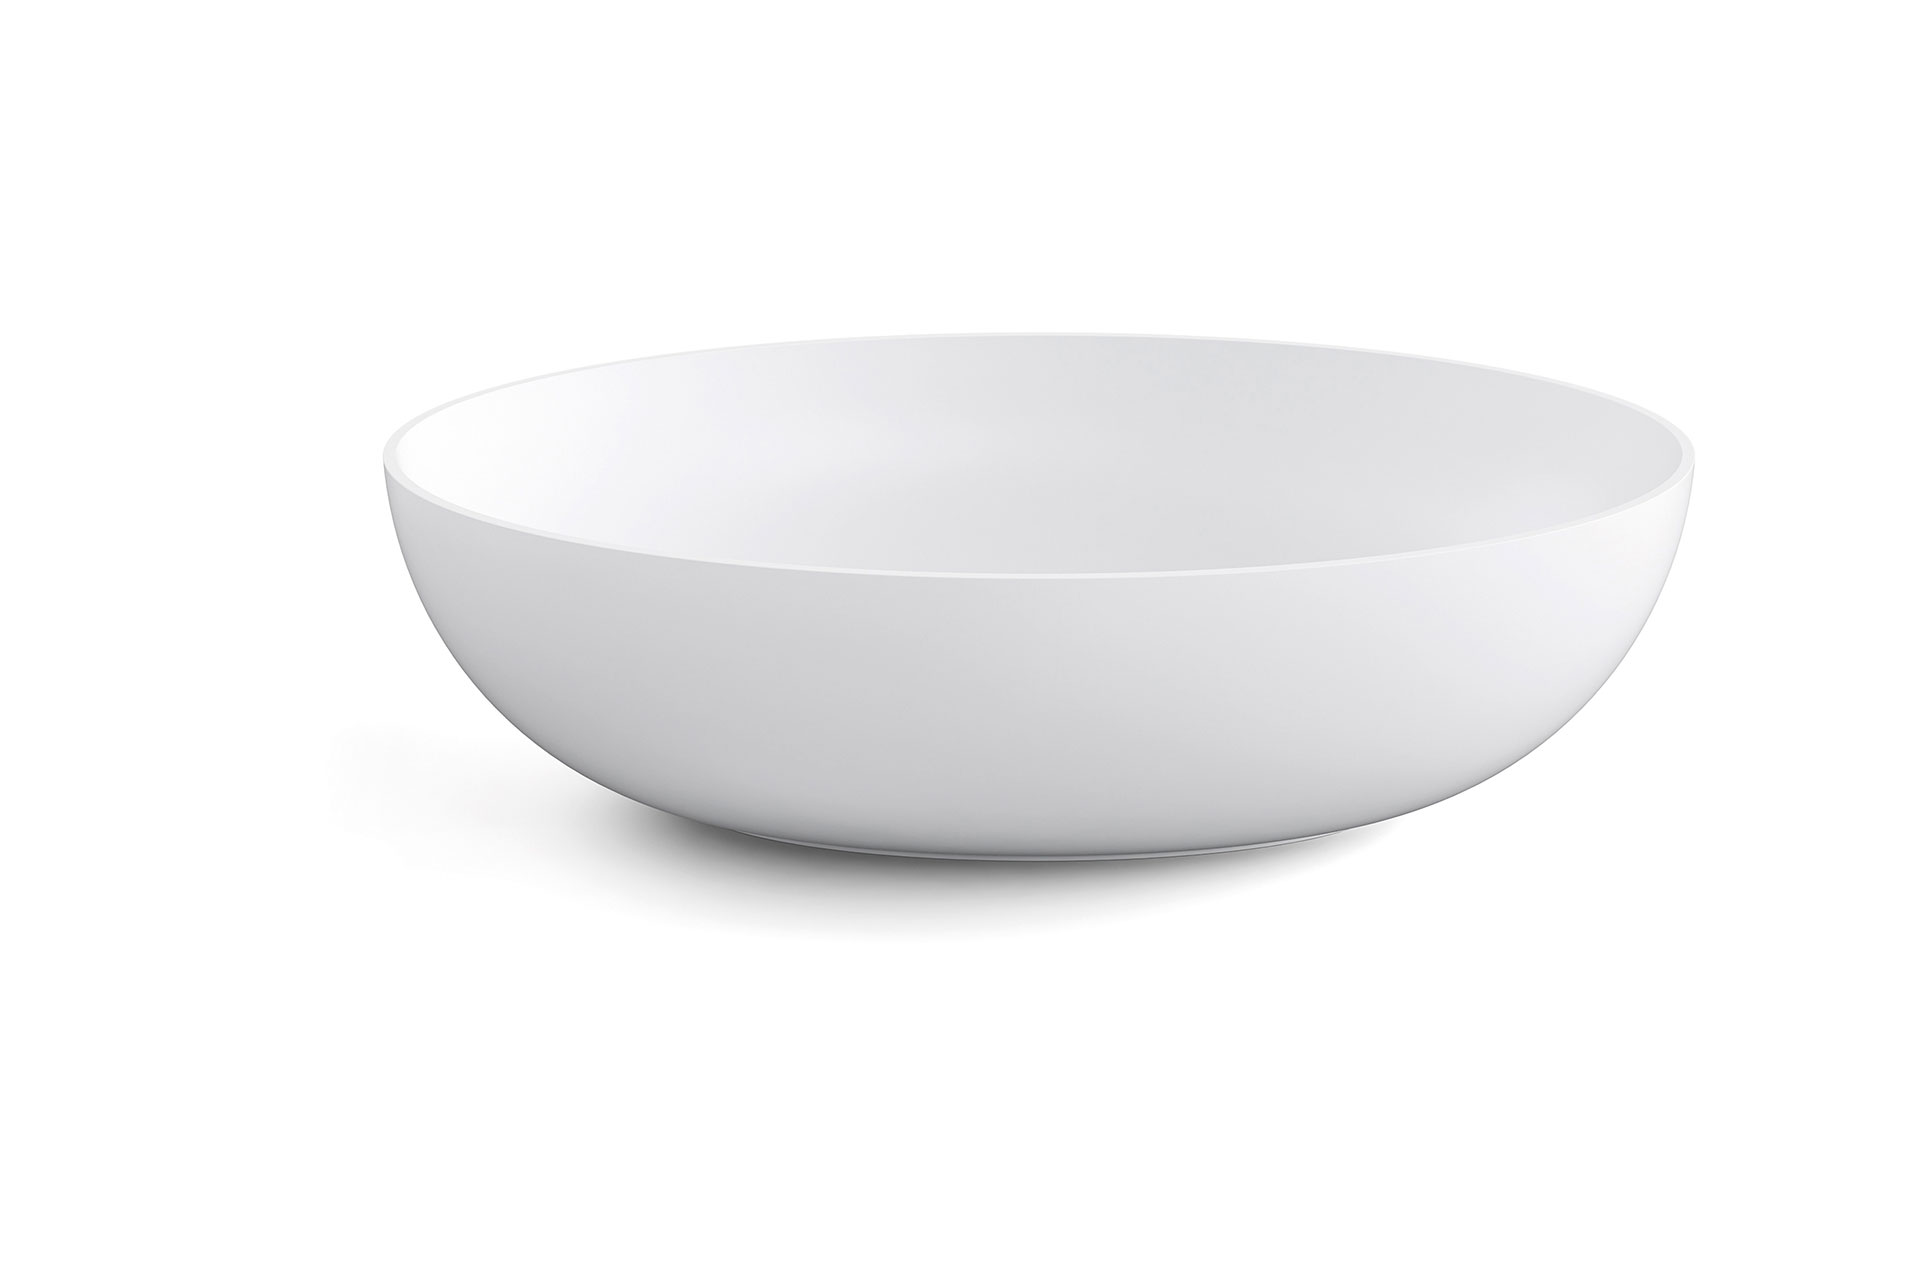 Oval countertop washbasin without free waste water drain